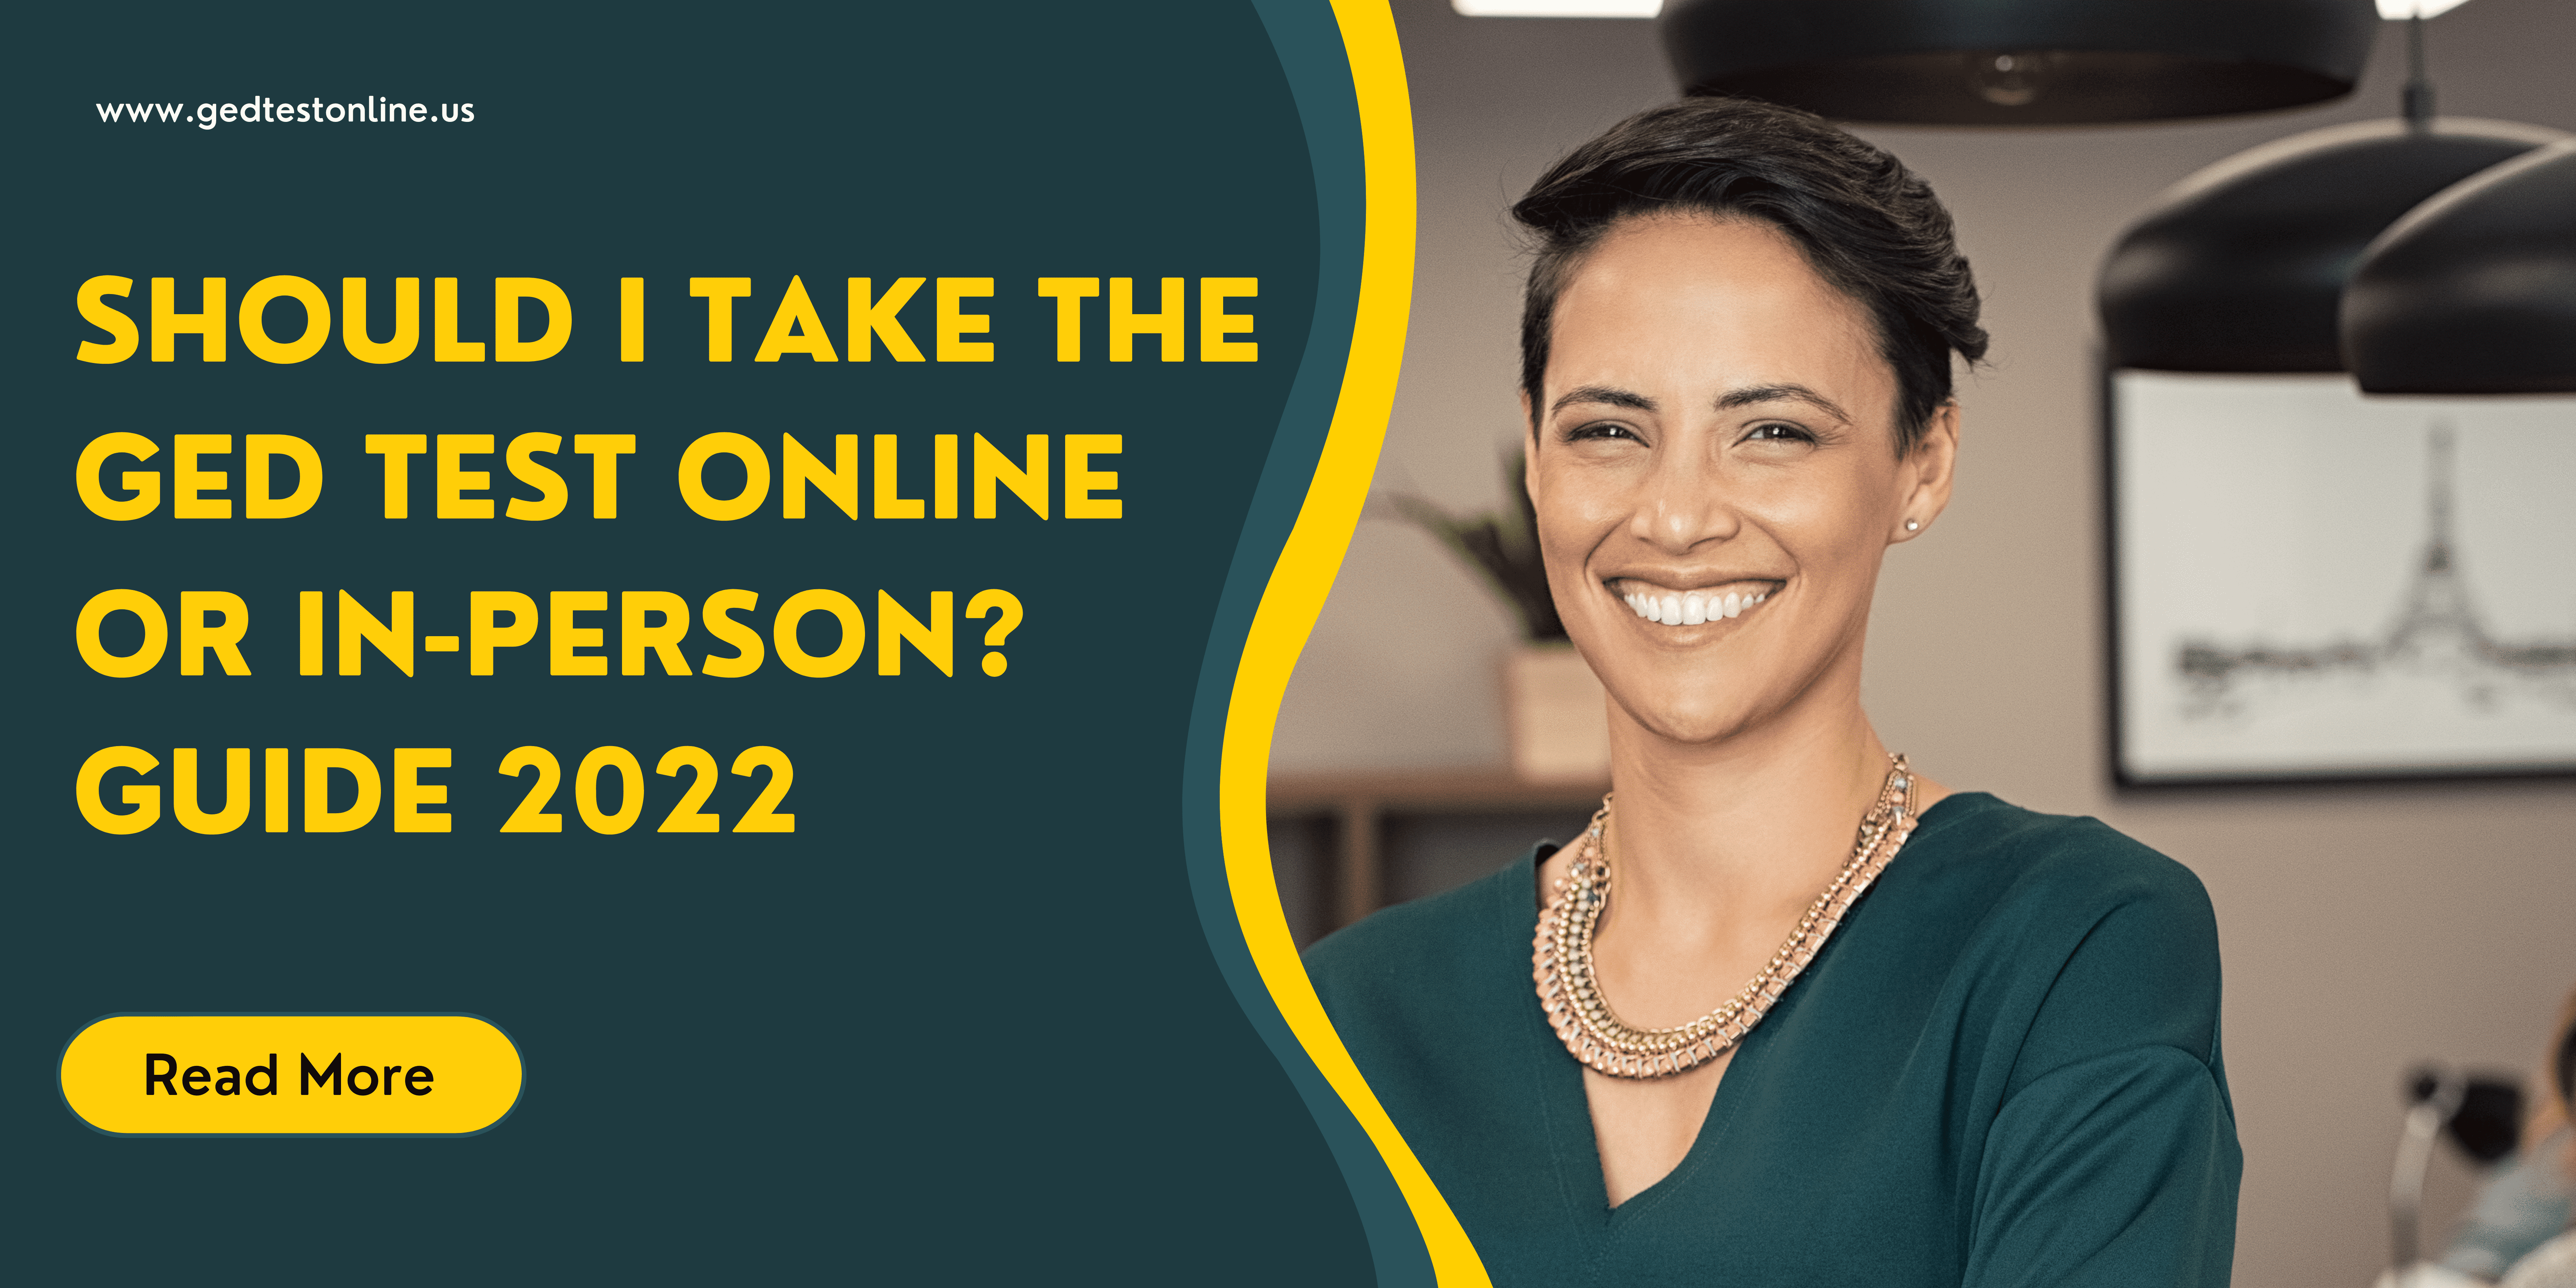 Should I Take the GED Test Online or In-Person? Guide 2022